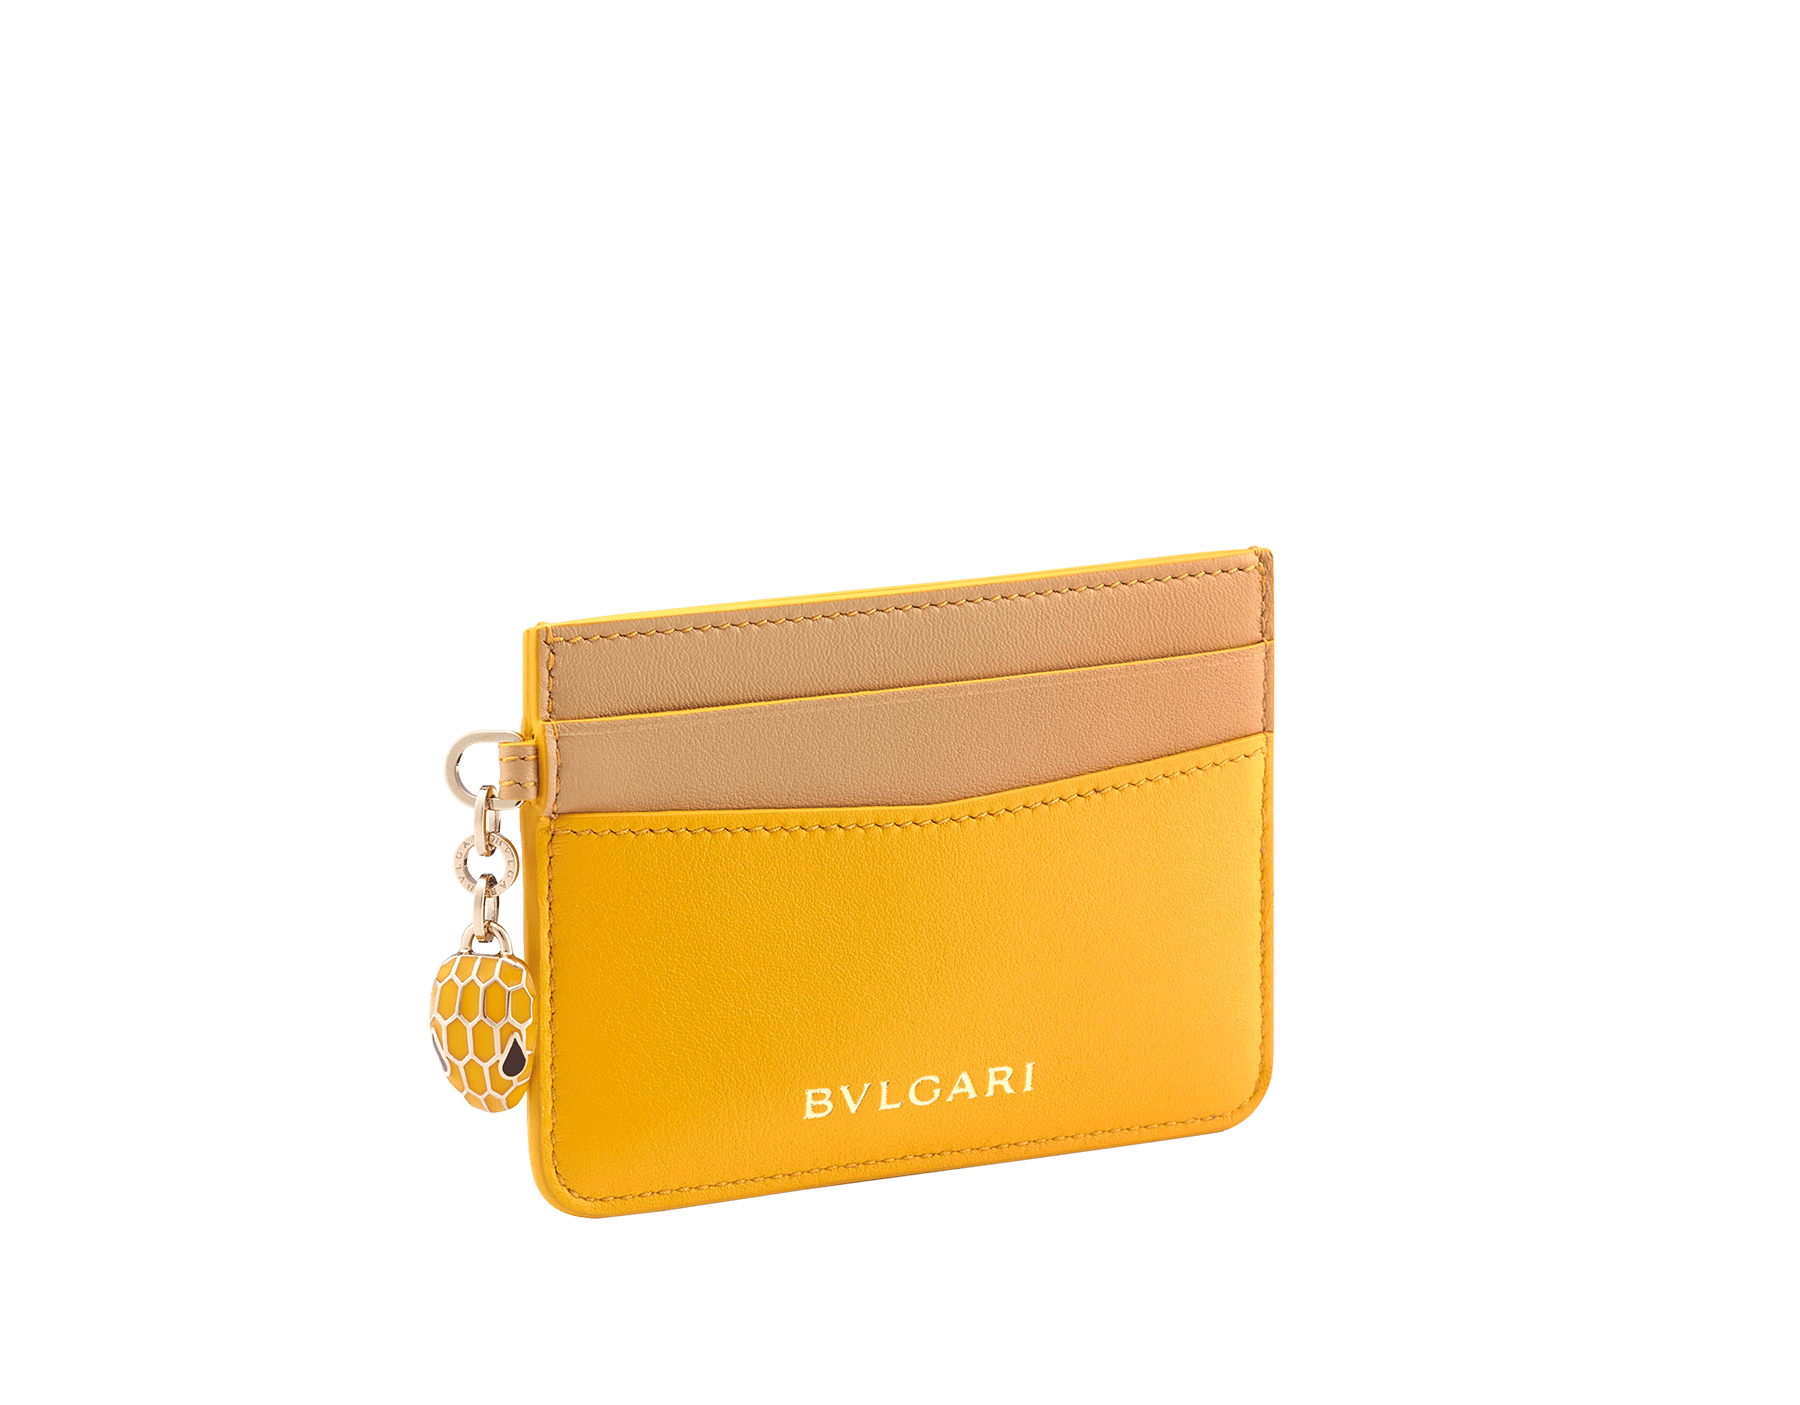 "Serpenti Forever" card holder in Blush Quartz pink calf leather and Deep Garnet burgundy nappa leather. Tempting light gold plated brass snakehead charm, finished with matte Blush Quartz pink enamel, and black enamel eyes. SEA-CC-HOLDER-CLb image 1